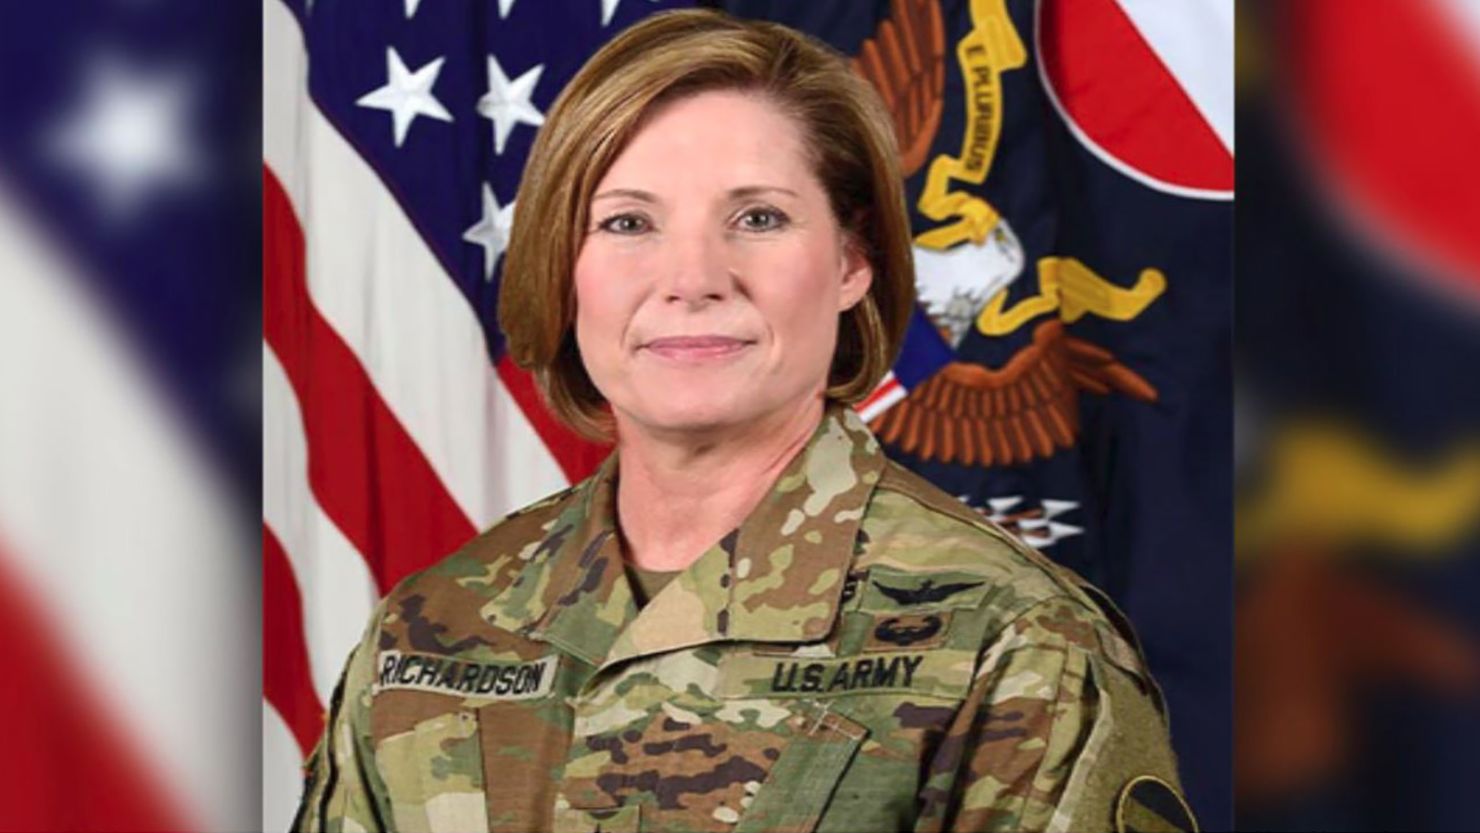 Lt. Gen. Laura J. Richardson earned her pilot's license at age 16 and has flown to high rank in the Army.